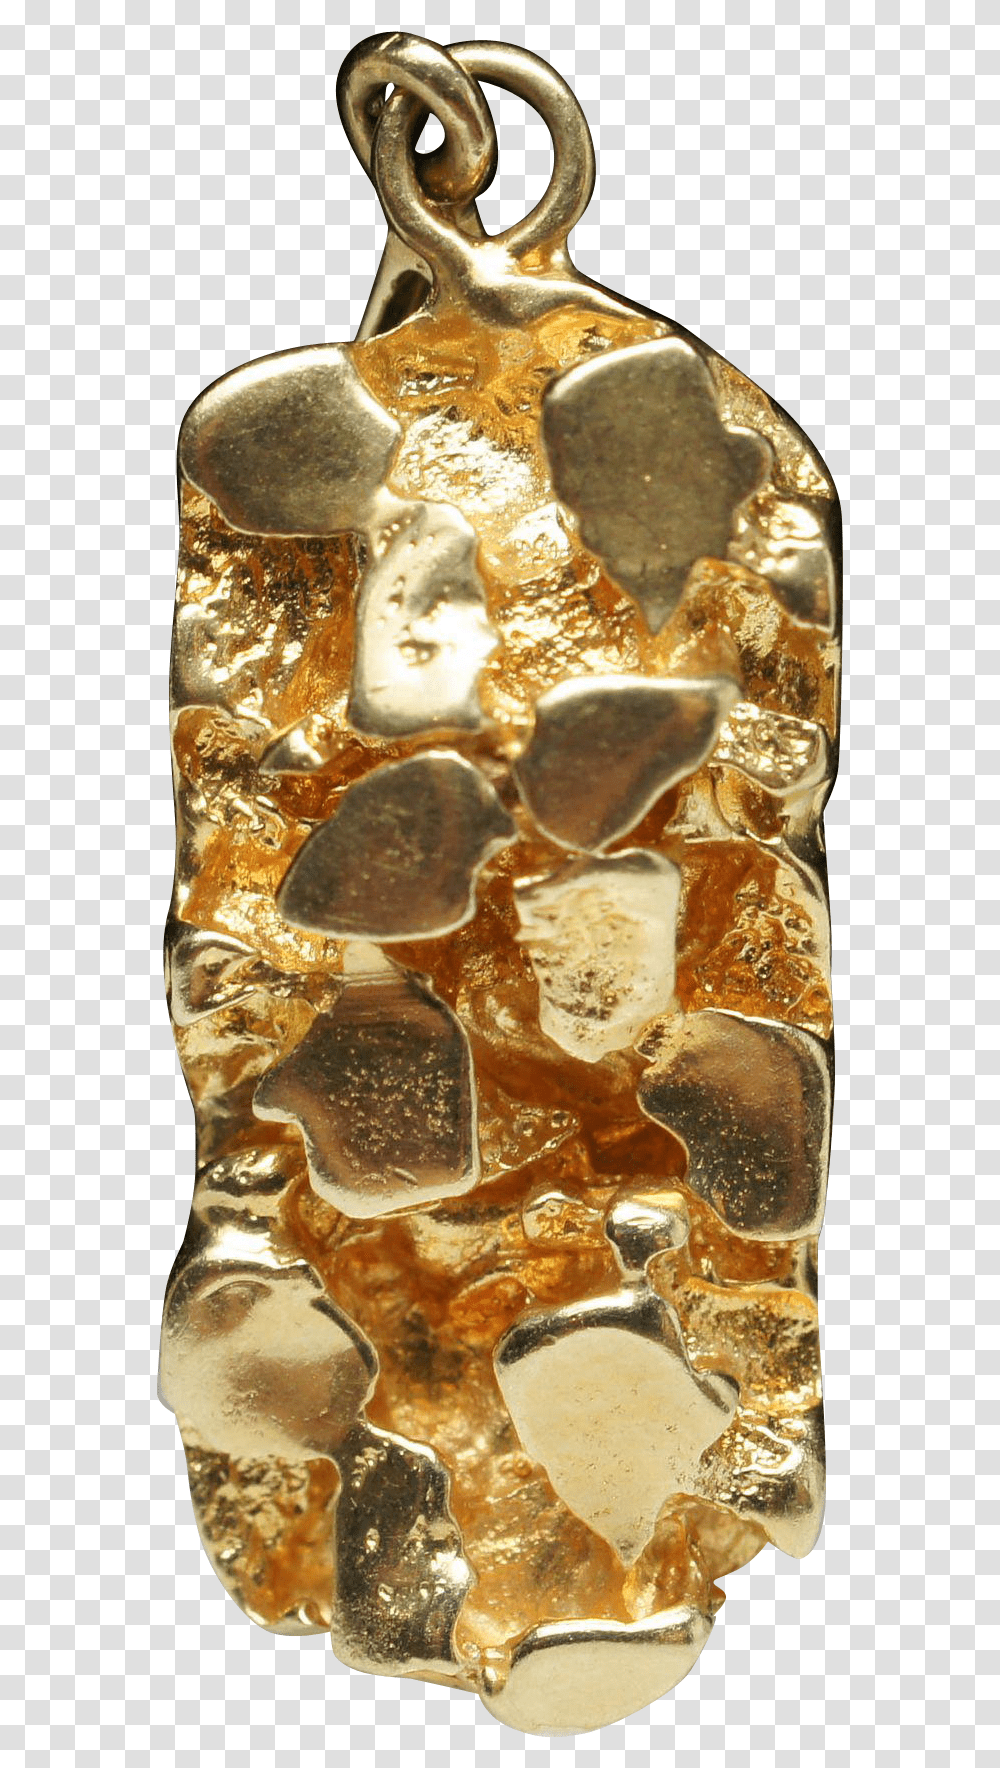 Download Gold Nuggets Image For Free Pingente De Pepita De Ouro, Accessories, Accessory, Gemstone, Jewelry Transparent Png